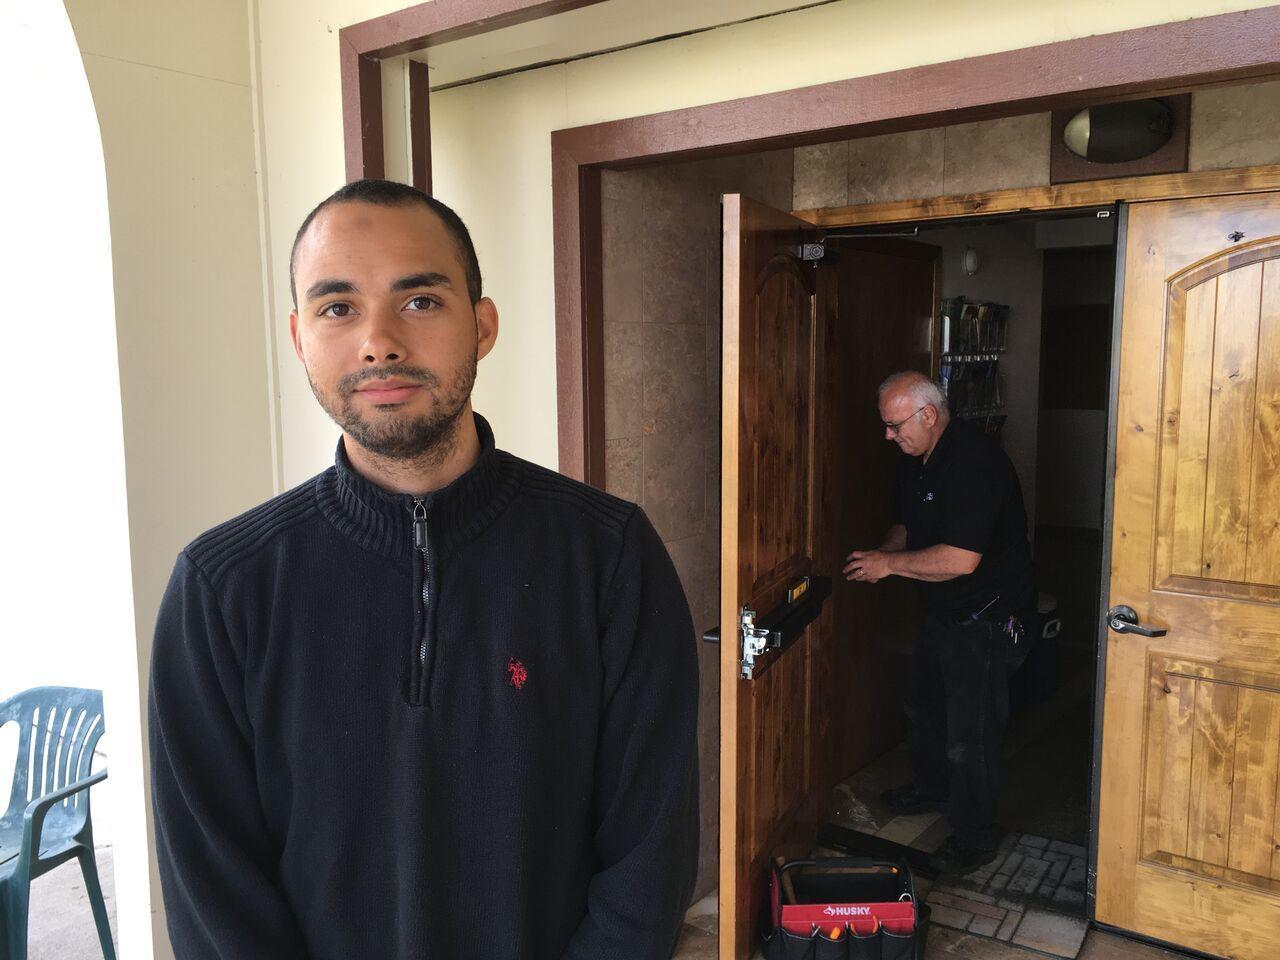 Drew Williams, a member of the Eugene Islamic Center, poses for a portrait outside the building in Eugene, Oregon, as locksmith Jim King upgrades the locks on the front doors.